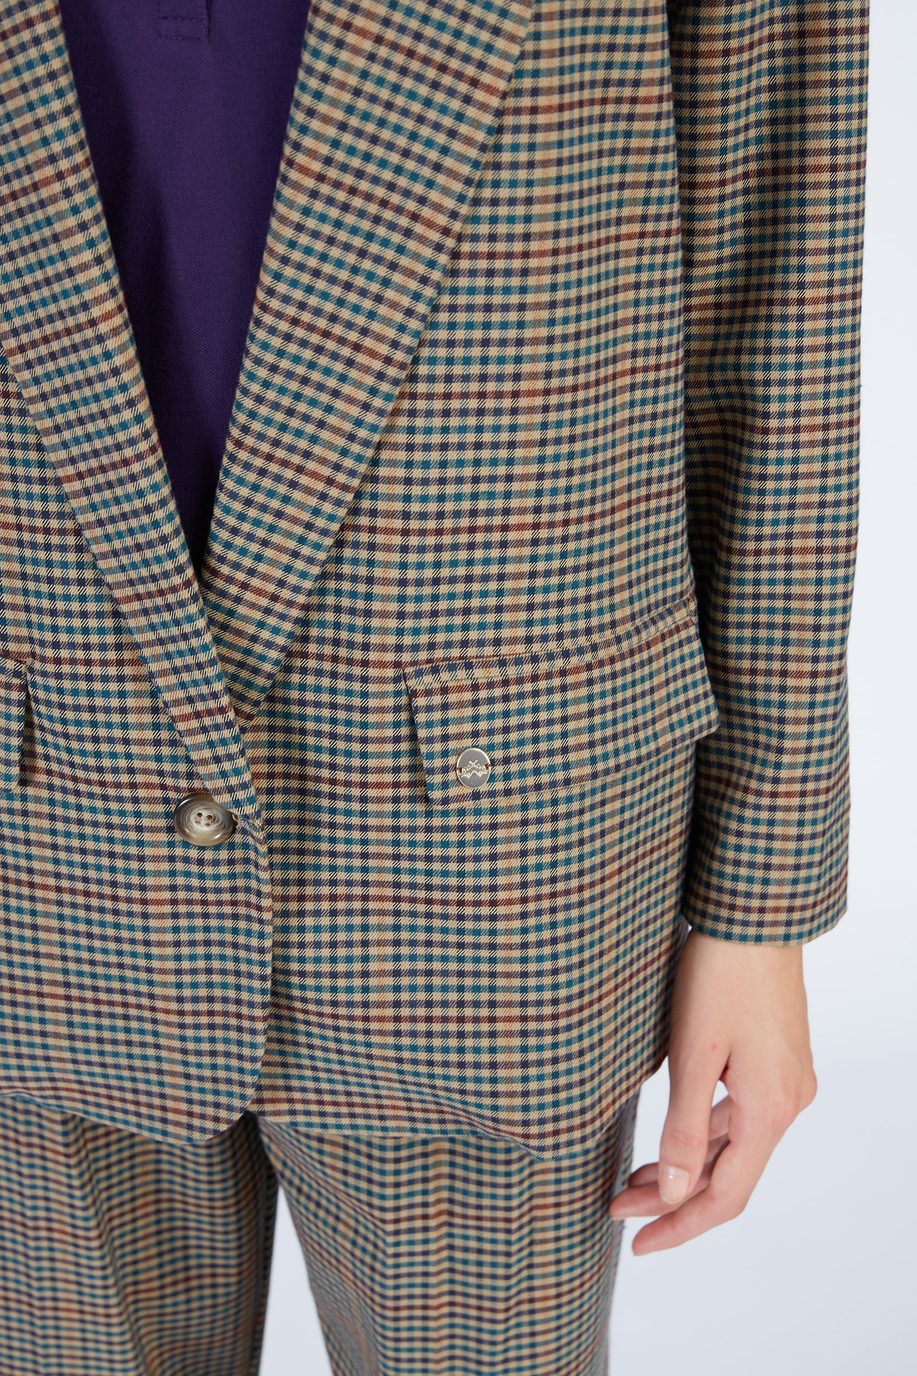 Women’s single-breasted twill jacquard blazer with pockets in regular fit - Women | La Martina - Official Online Shop